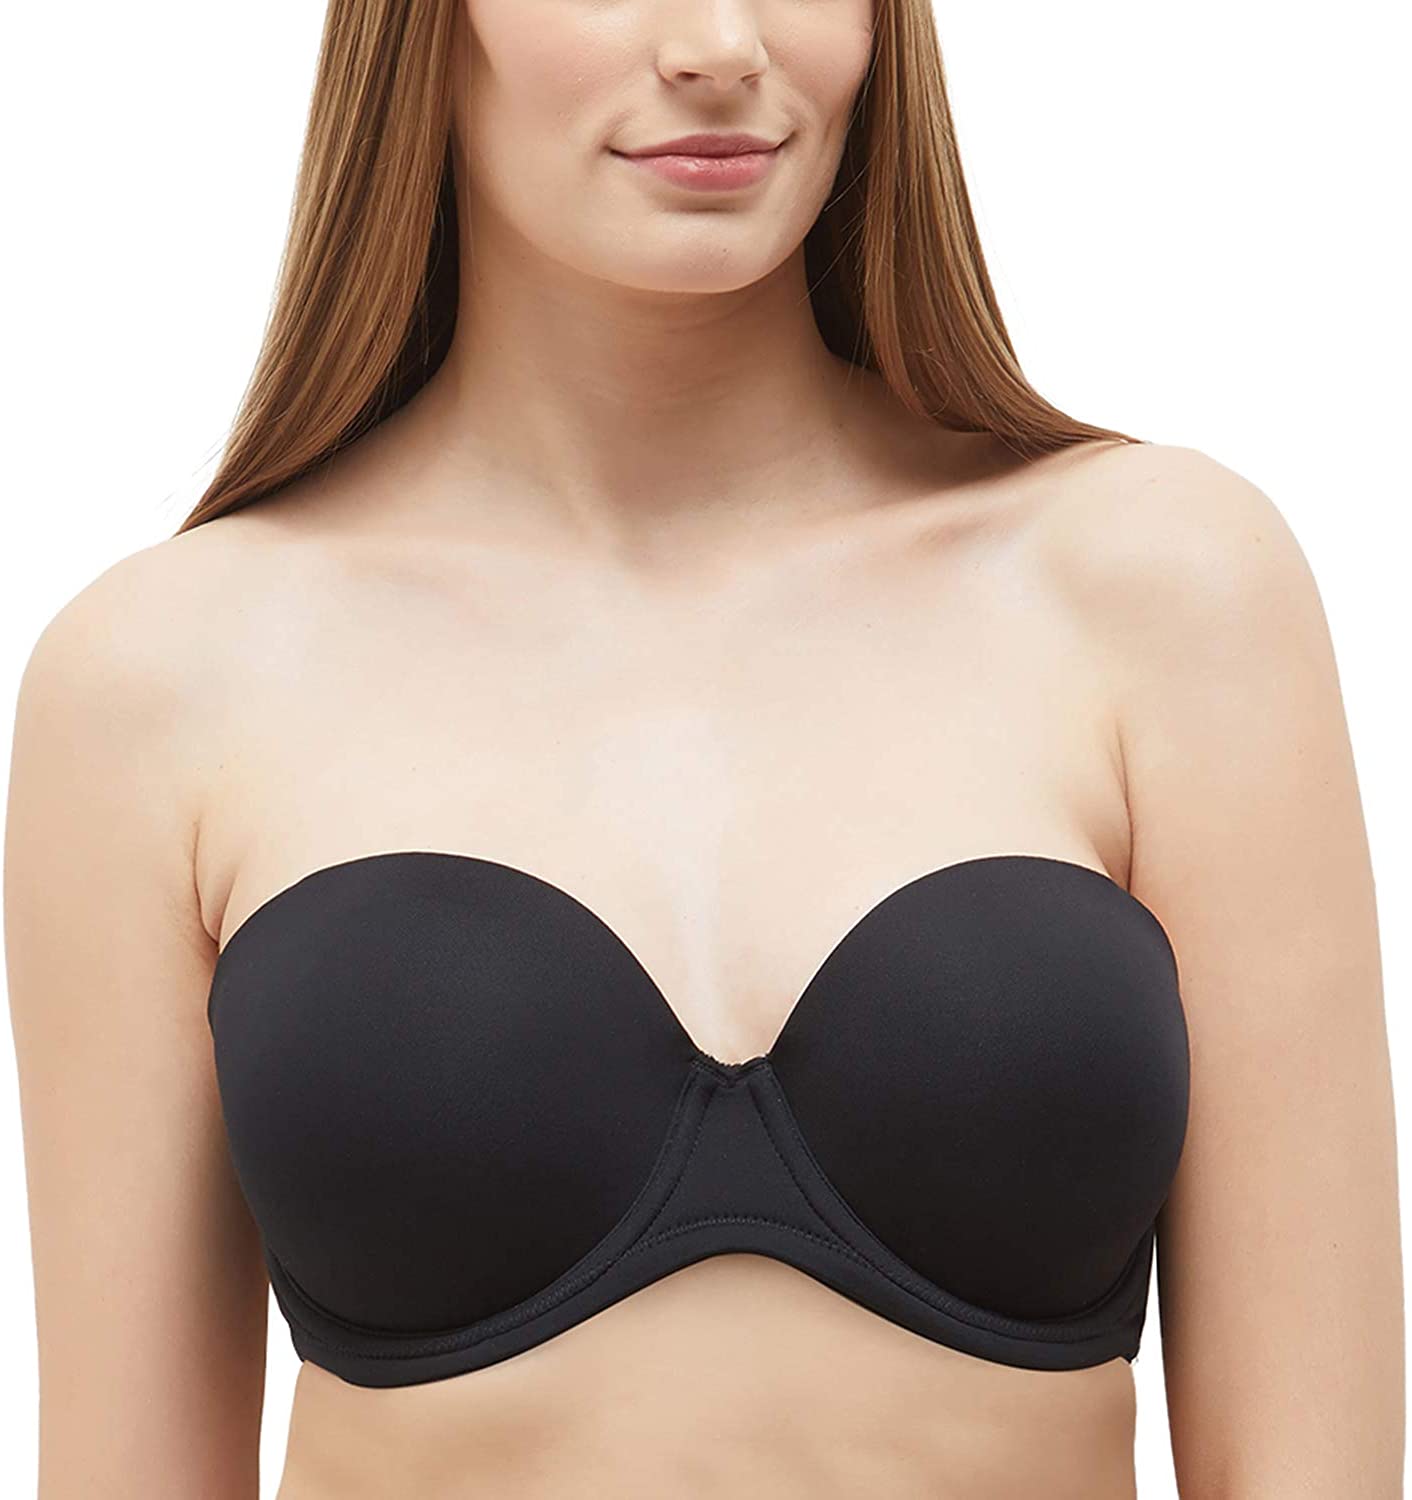 Best Strapless Bra for Large Busts